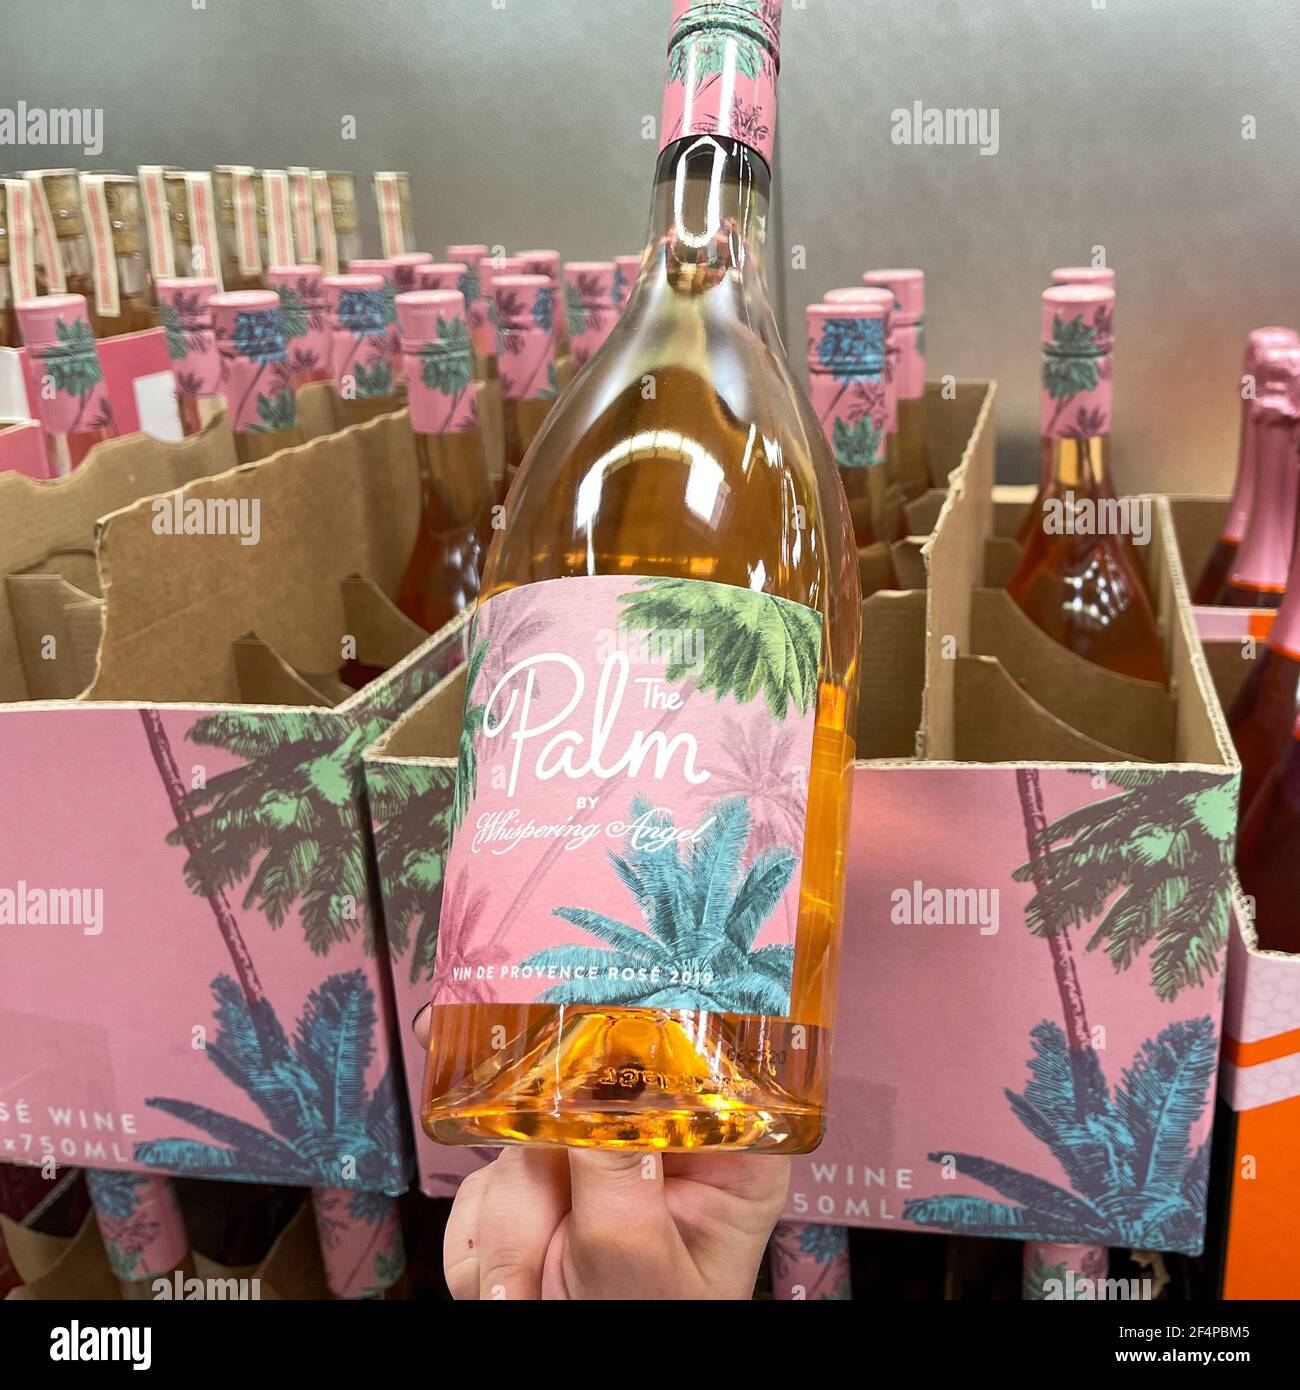 Orlando, FL USA - March 14, 2021:  Bottles of The Palm by Whispering Angel Rose Wine at a Sams Club in Orlando, Florida. Stock Photo